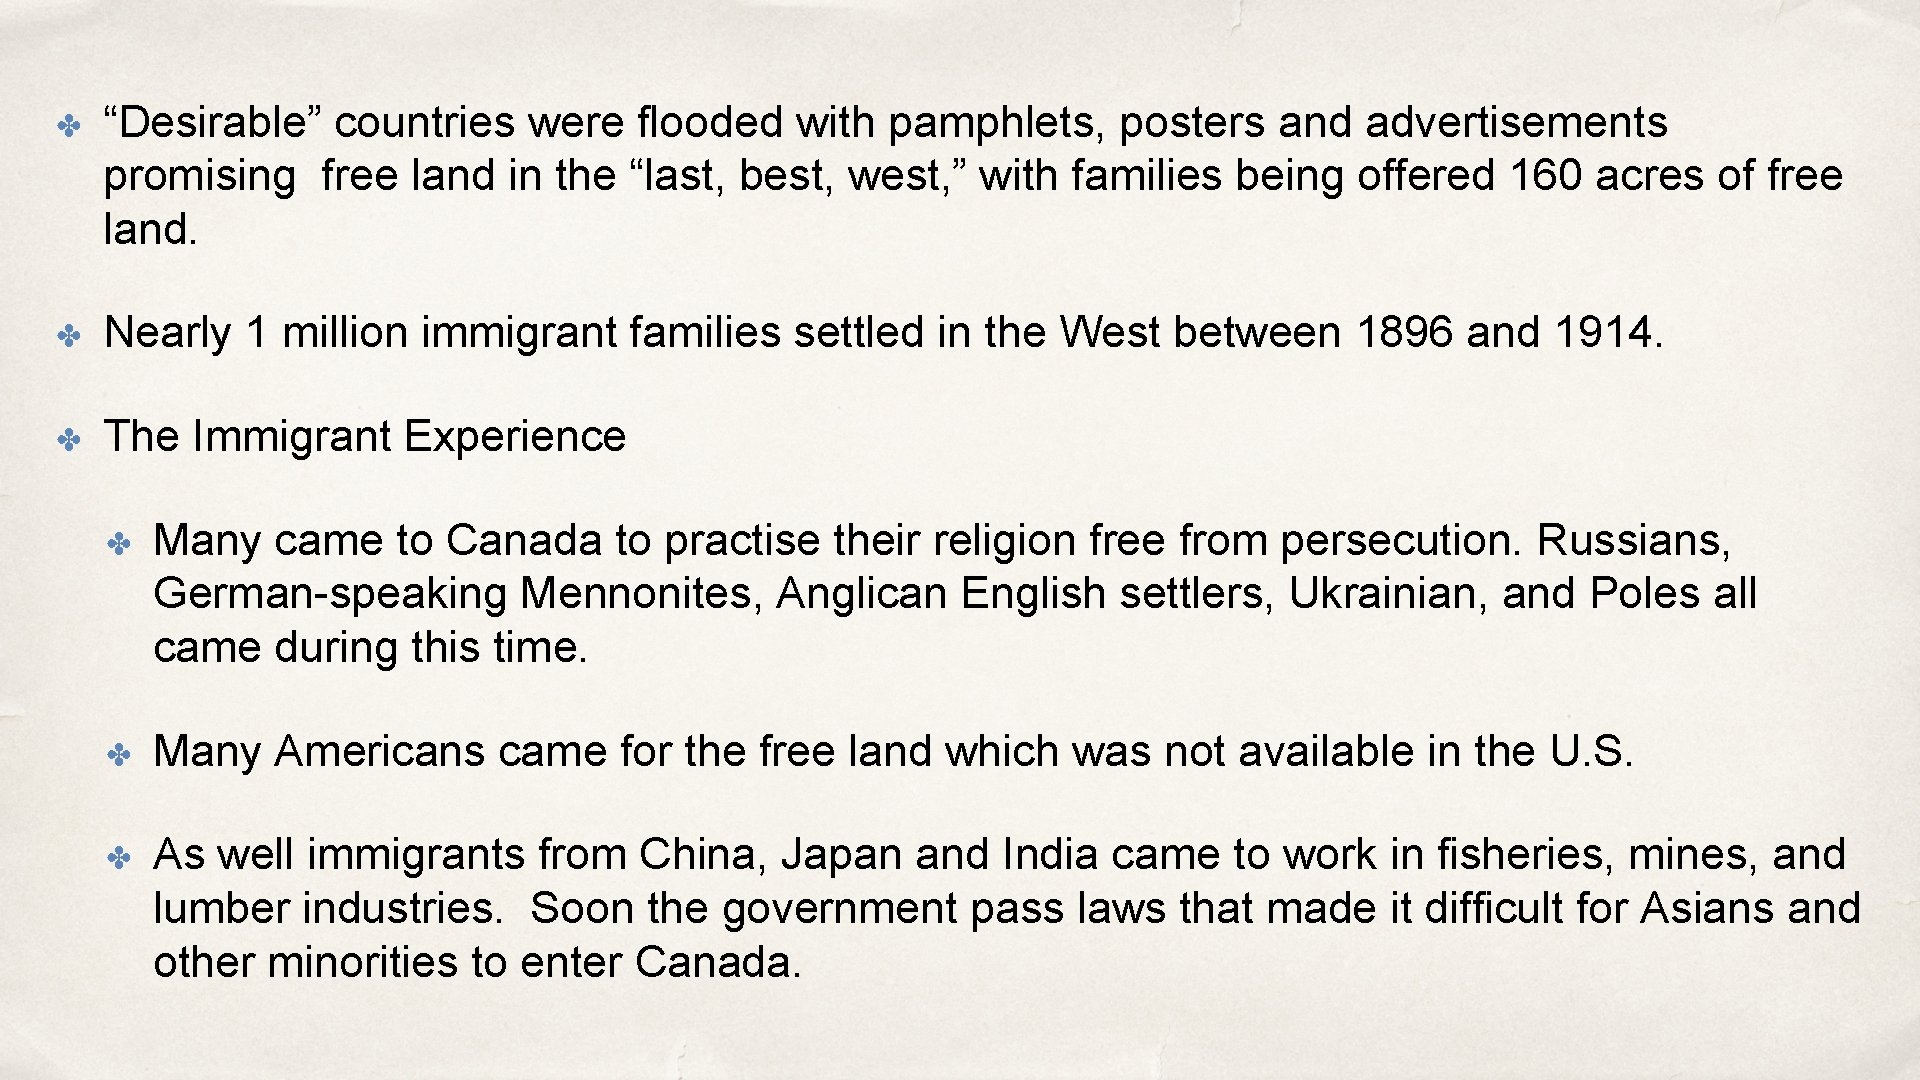 ✤ “Desirable” countries were flooded with pamphlets, posters and advertisements promising free land in